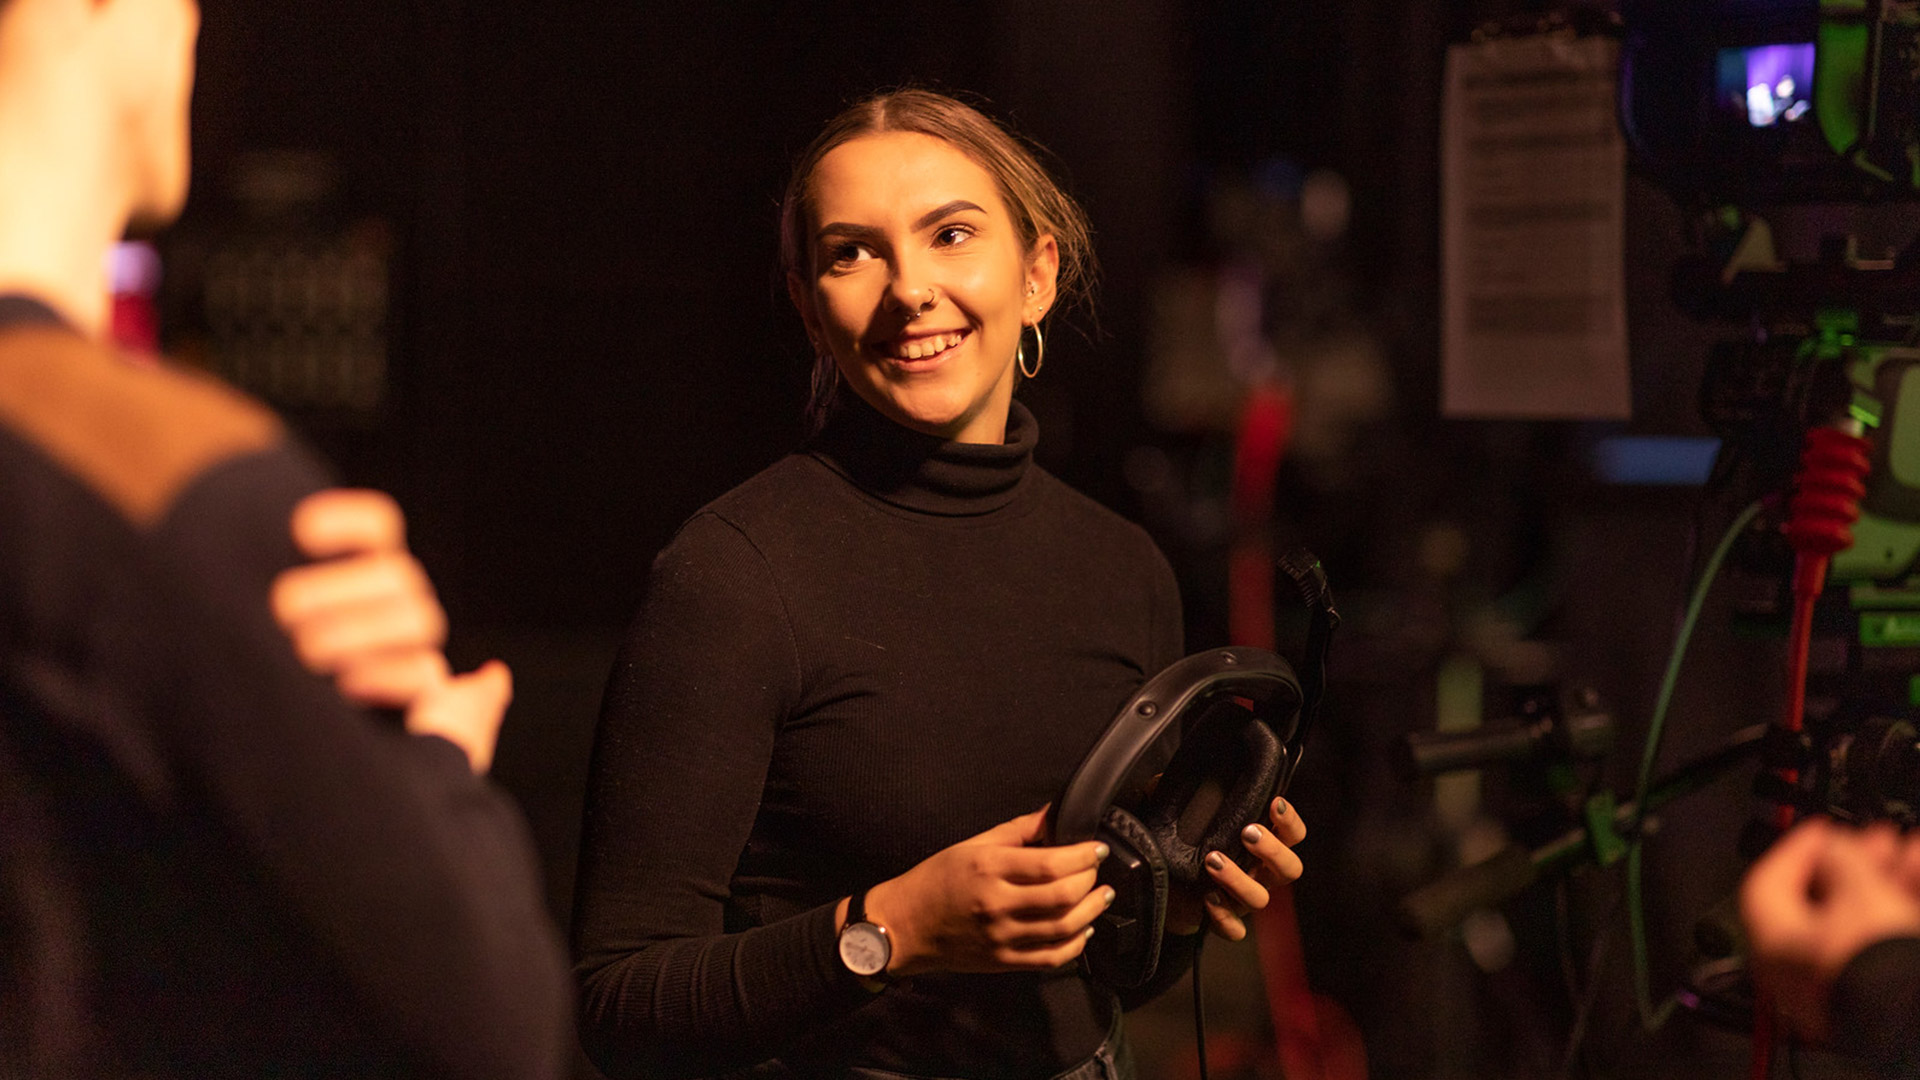 A student smiles as they hold headphones backstage in the TV recording studio